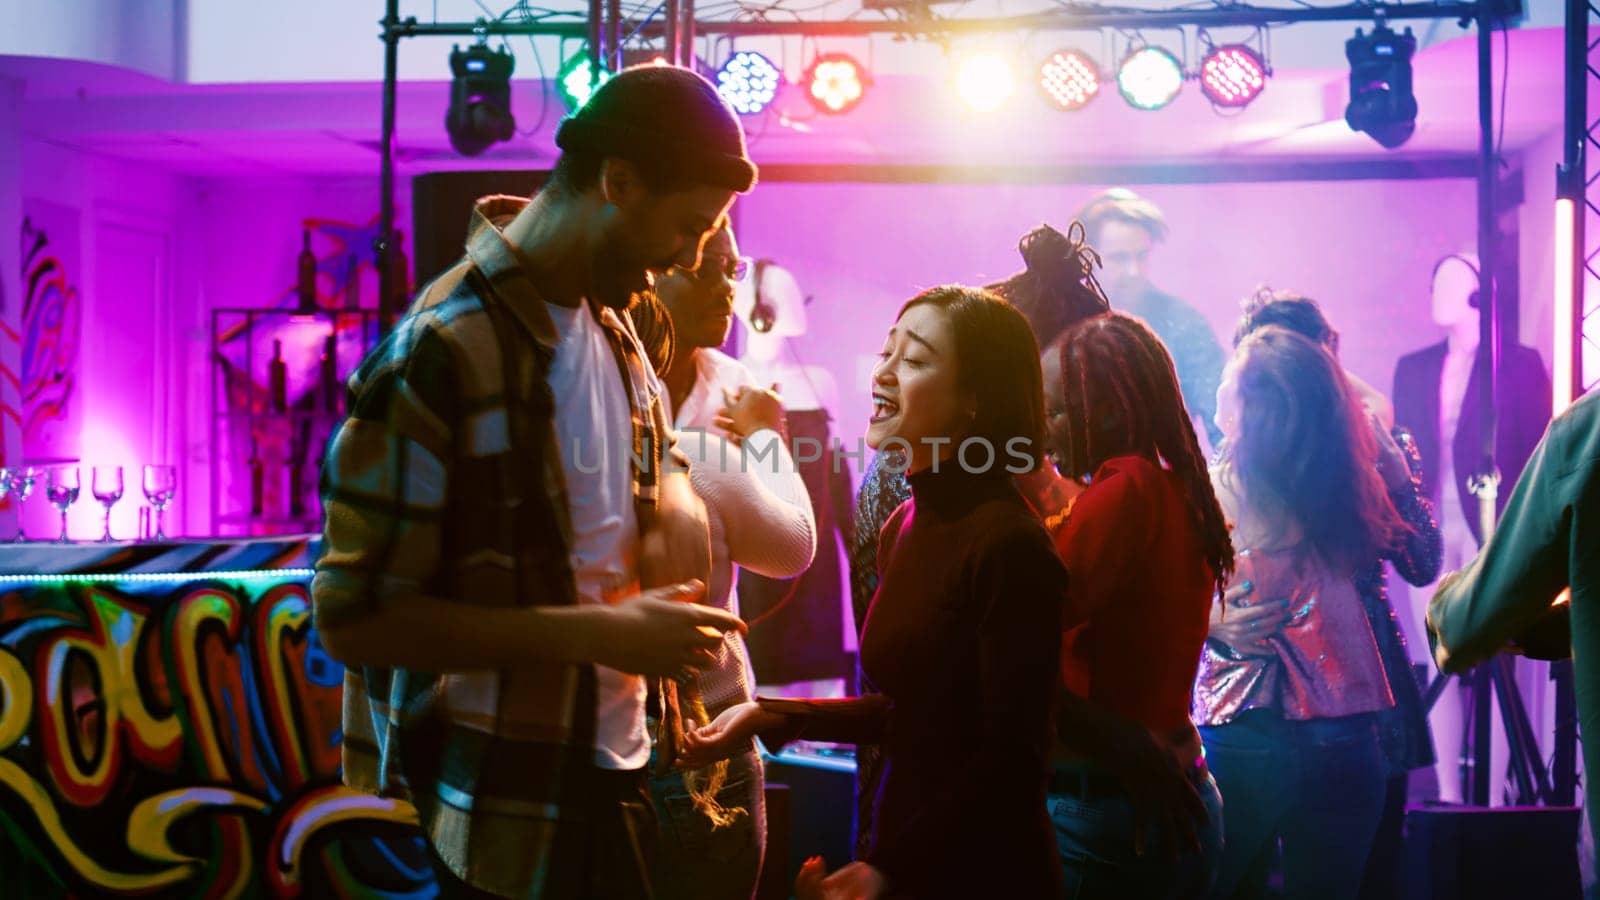 Happy couples partying at nightclub by DCStudio